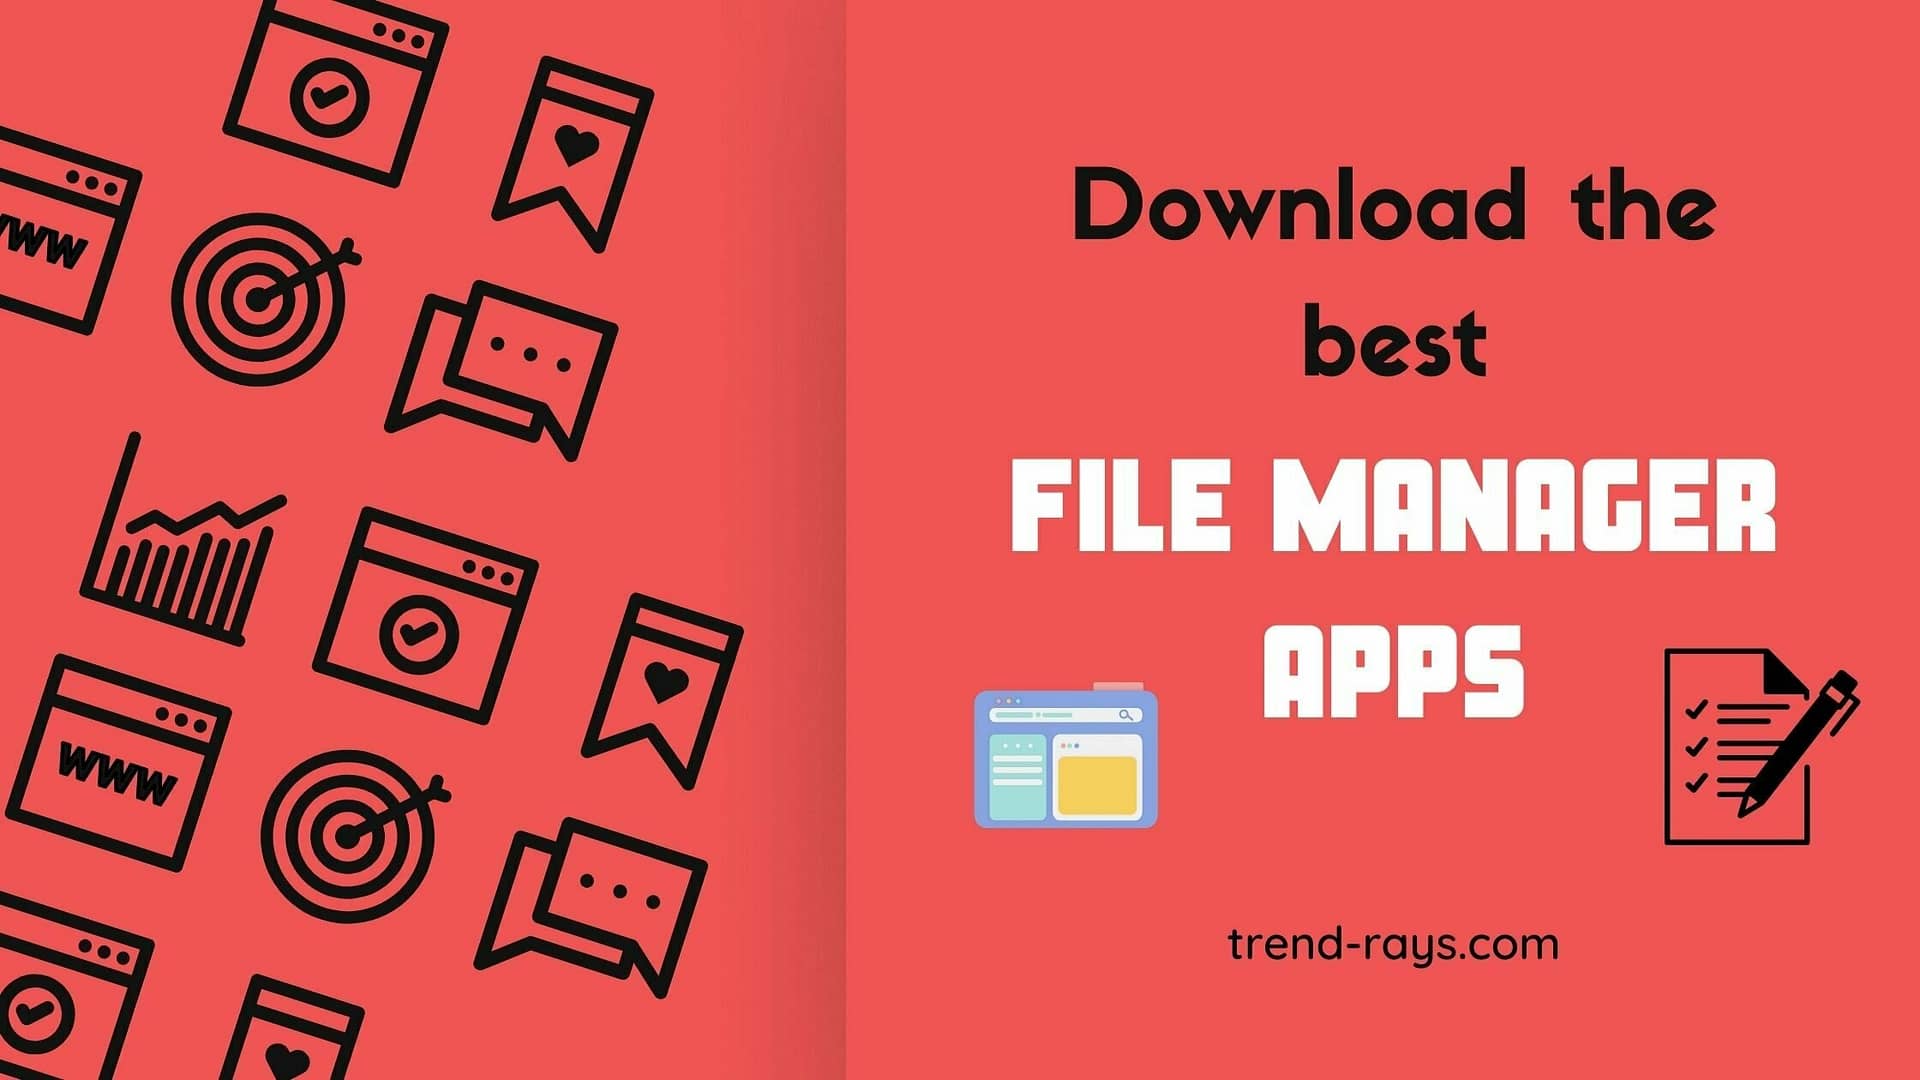 File Manager apps